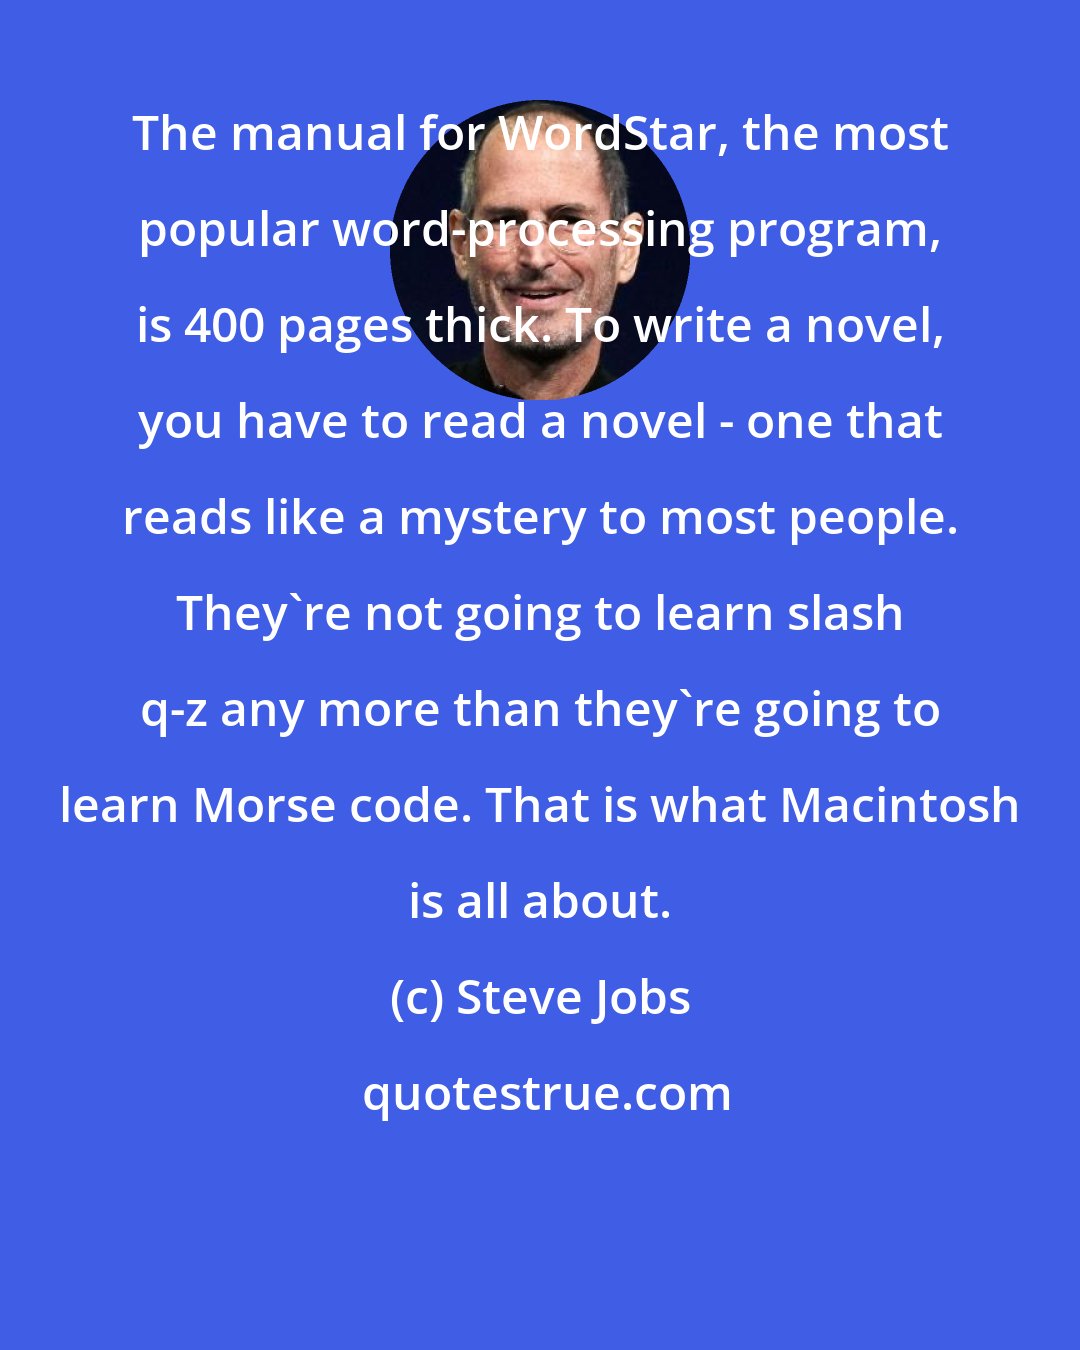 Steve Jobs: The manual for WordStar, the most popular word-processing program, is 400 pages thick. To write a novel, you have to read a novel - one that reads like a mystery to most people. They're not going to learn slash q-z any more than they're going to learn Morse code. That is what Macintosh is all about.